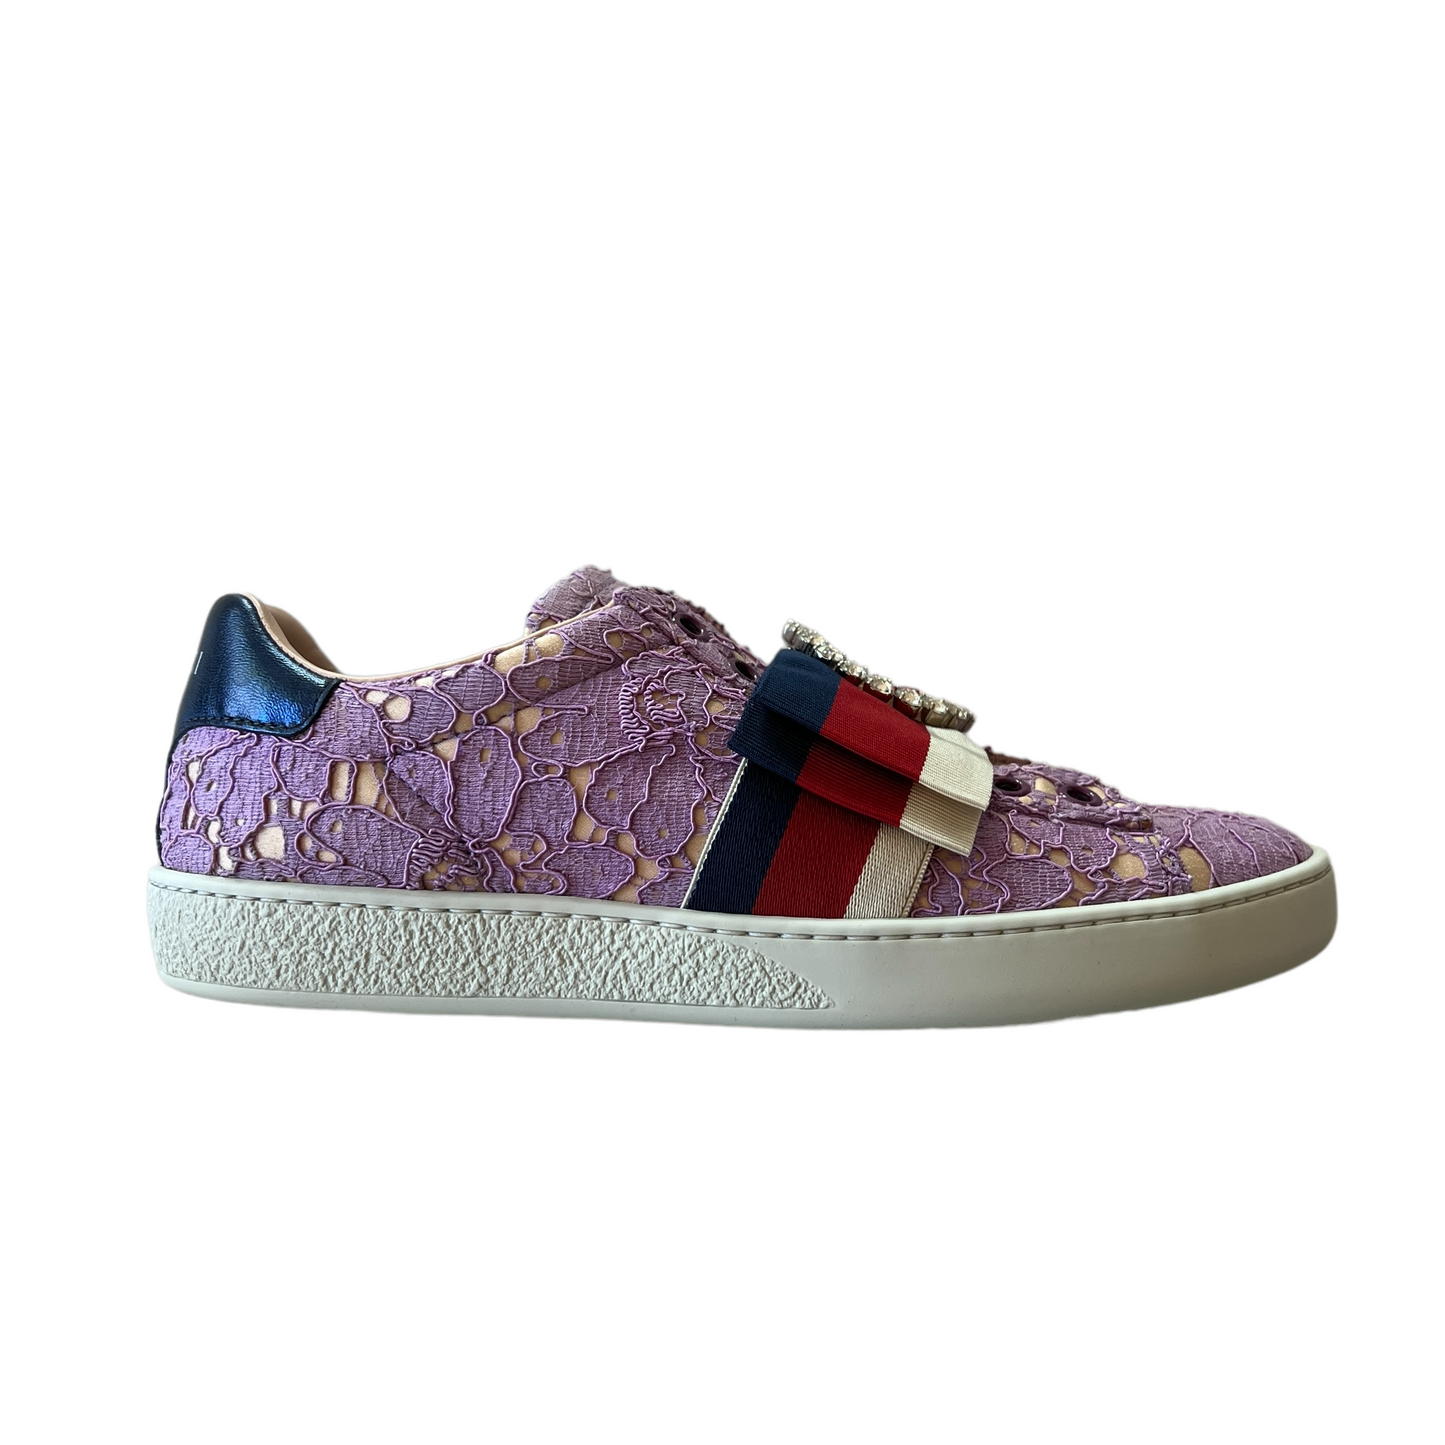 Purple Lace and Crystals Sneakers - 7